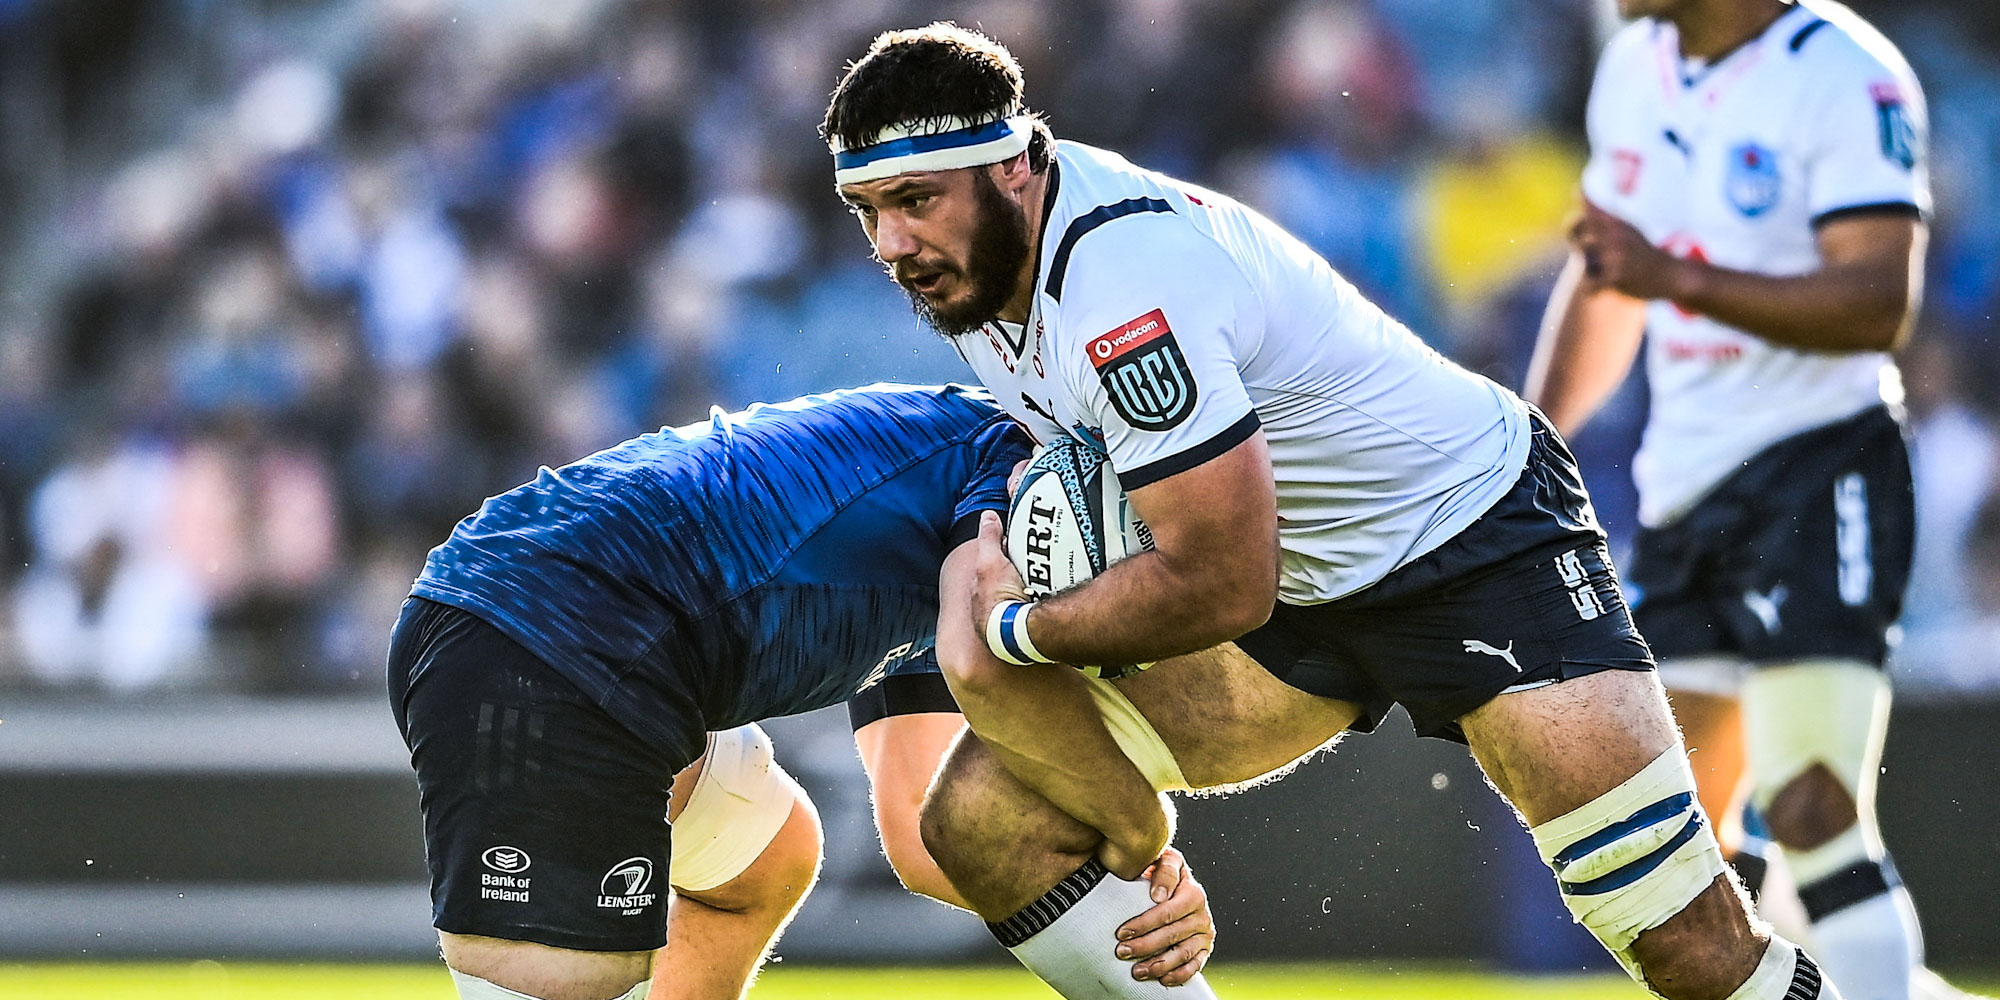 Vodacom Bulls captain Marcell Coetzee put in yet another massive shift and scored one of their tries.